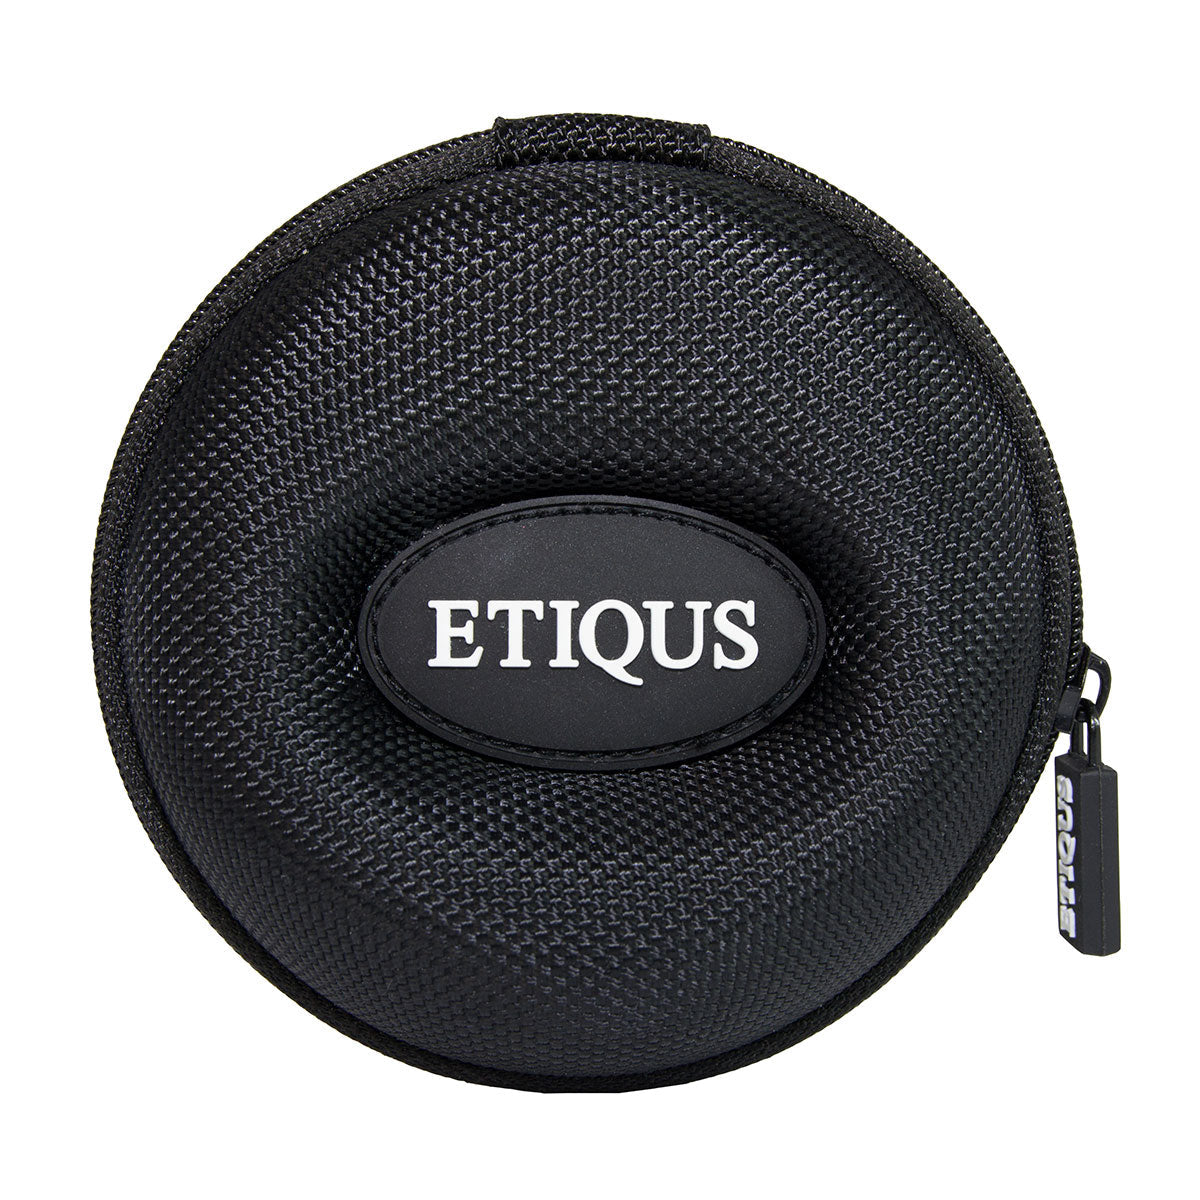 ETIQUS SPORT PRO IONIC with Night Black Dial and Black Leather Strap